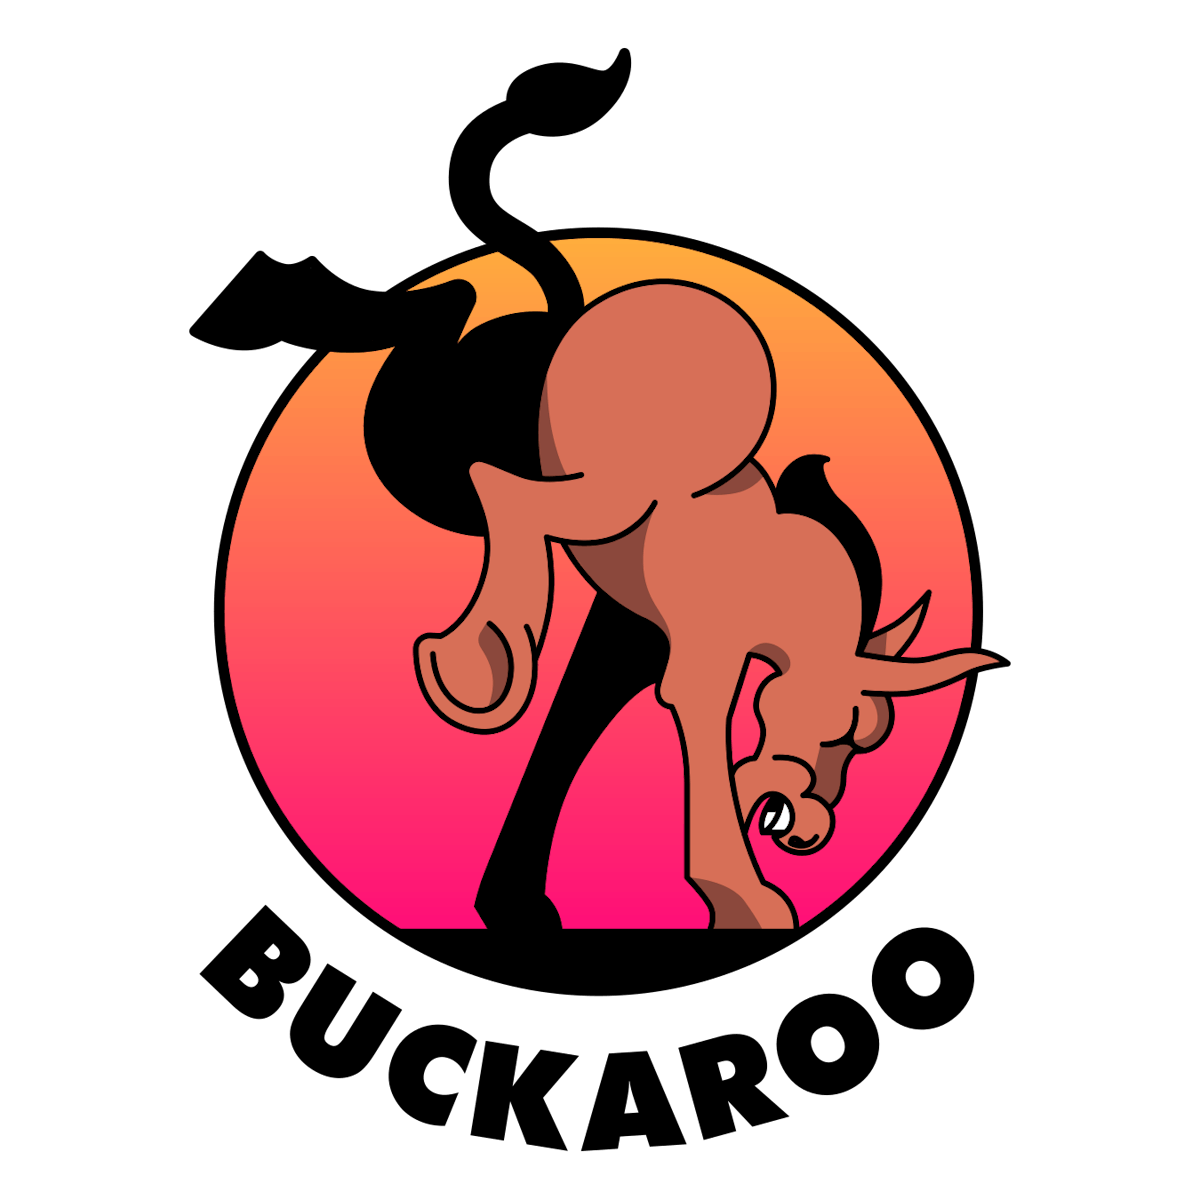 featured image - What’s new in Buckaroo 2?